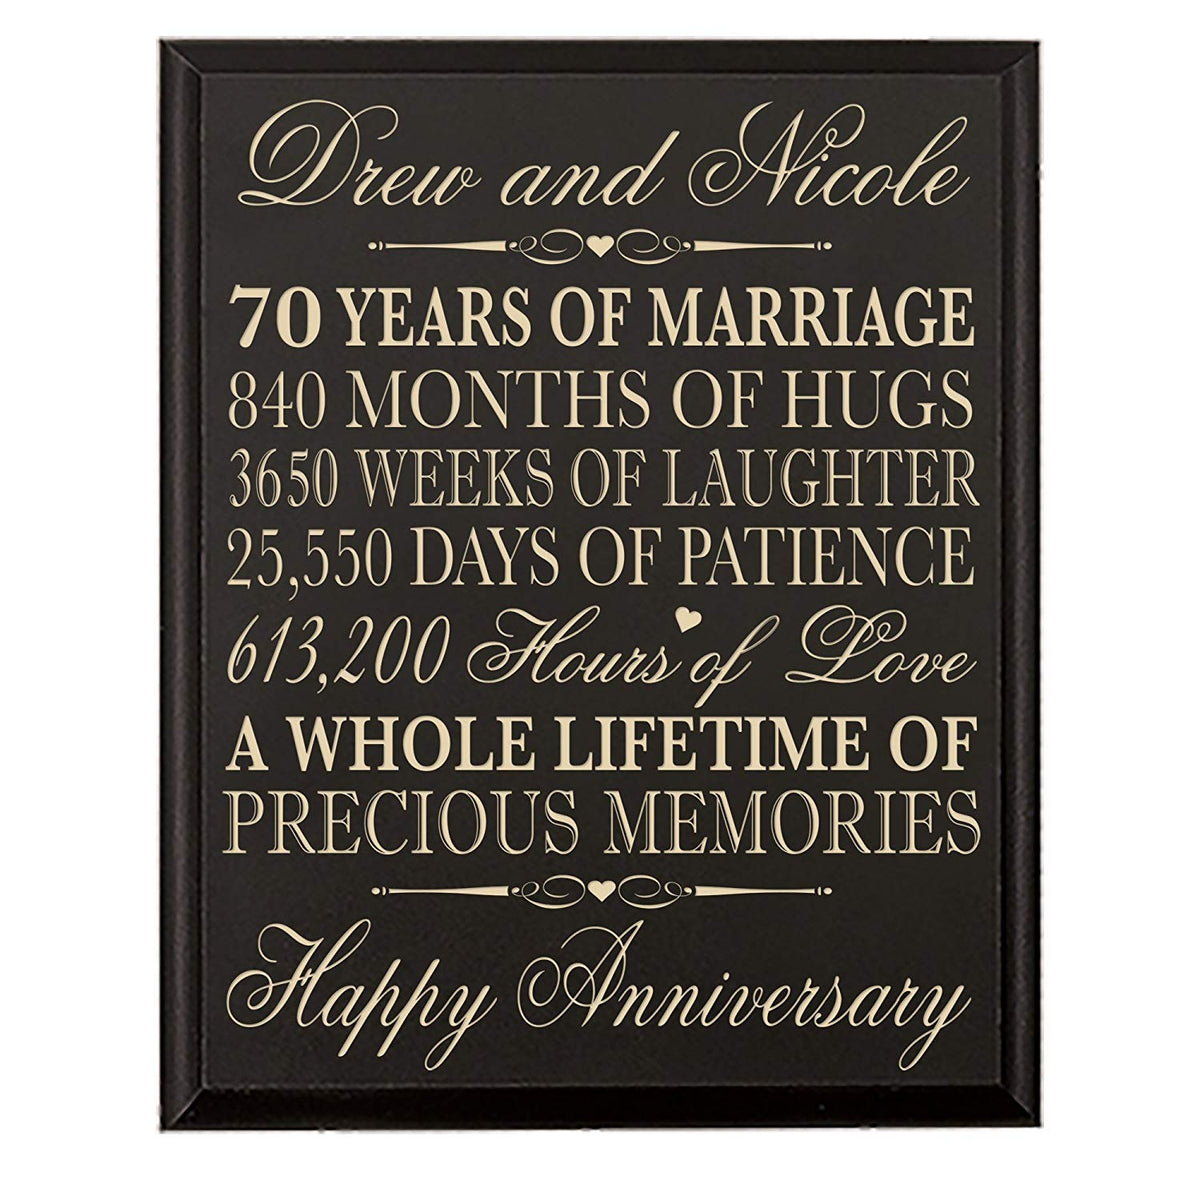 Personalized 70th Anniversary Wall Plaque Gift - Happy Anniversary - LifeSong Milestones